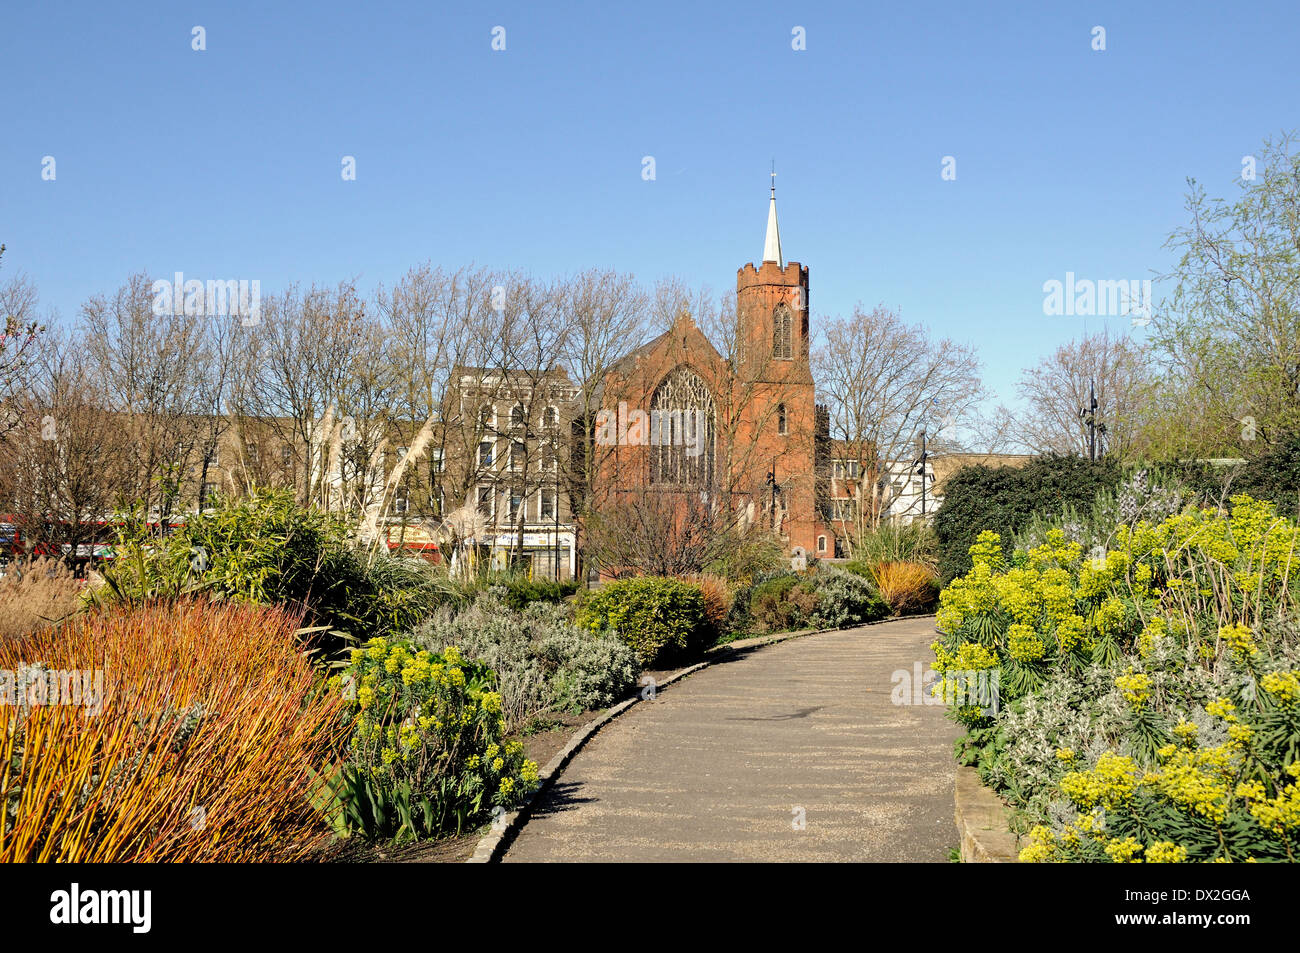 Mile End Park with The Guardian Angels Church in the distance, London Borough of Tower Hamlets, Engalnd UK Stock Photo